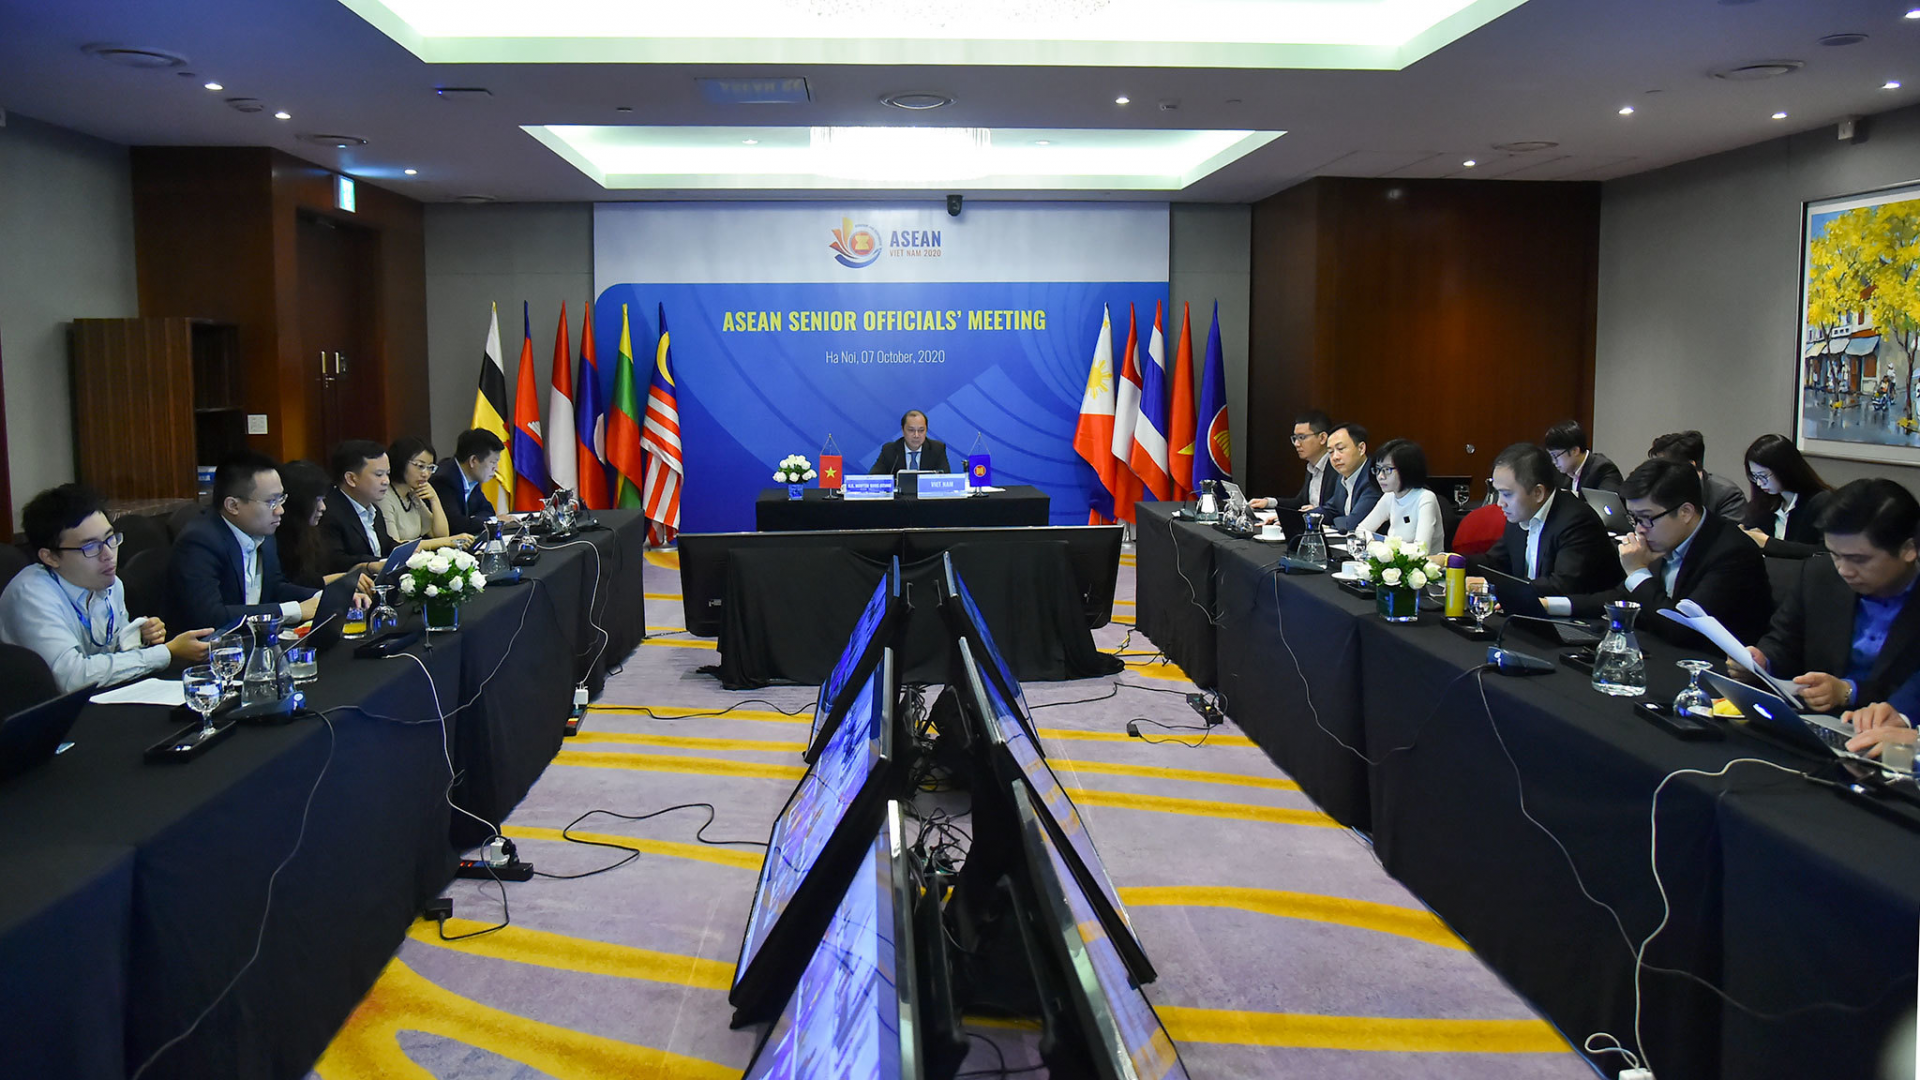 ASEAN pledges to coordinate with China to soon complete talks for Code of Conduct in South China Sea (Bien Dong Sea)